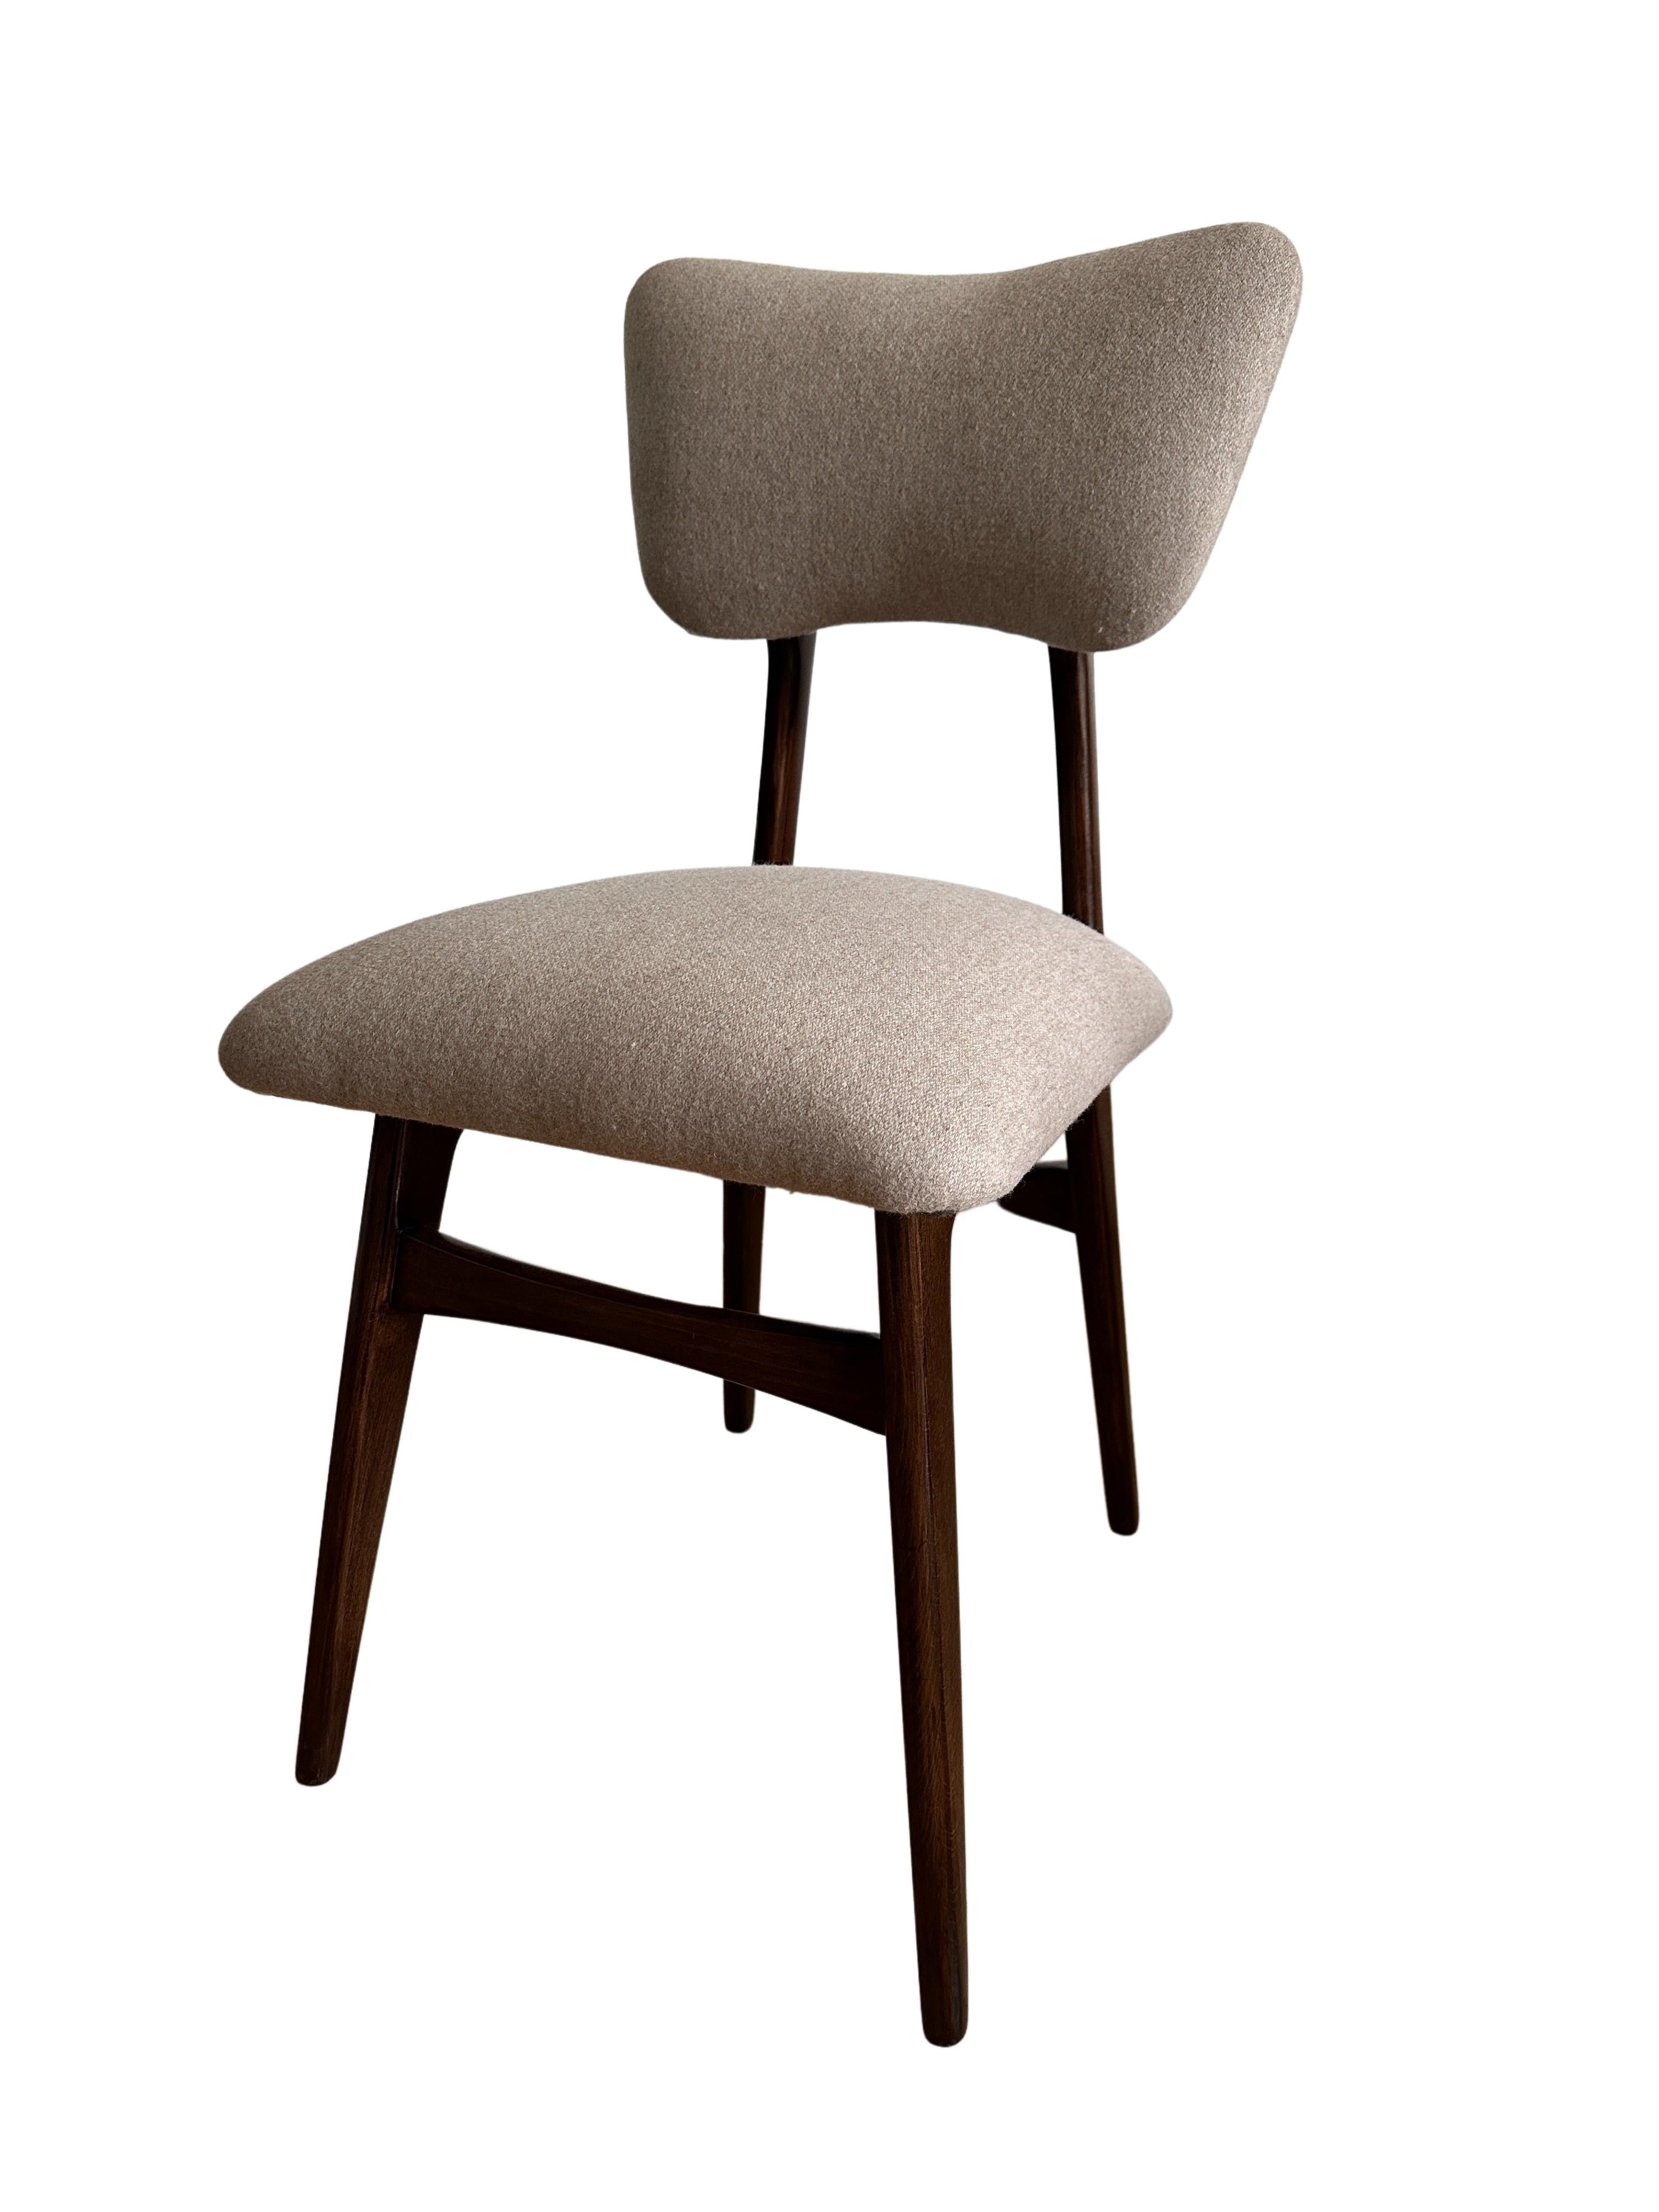 Bouclé Set of 6 Midcentury Dining Chairs in Beige Wool Upholstery, Poland, 1960s For Sale